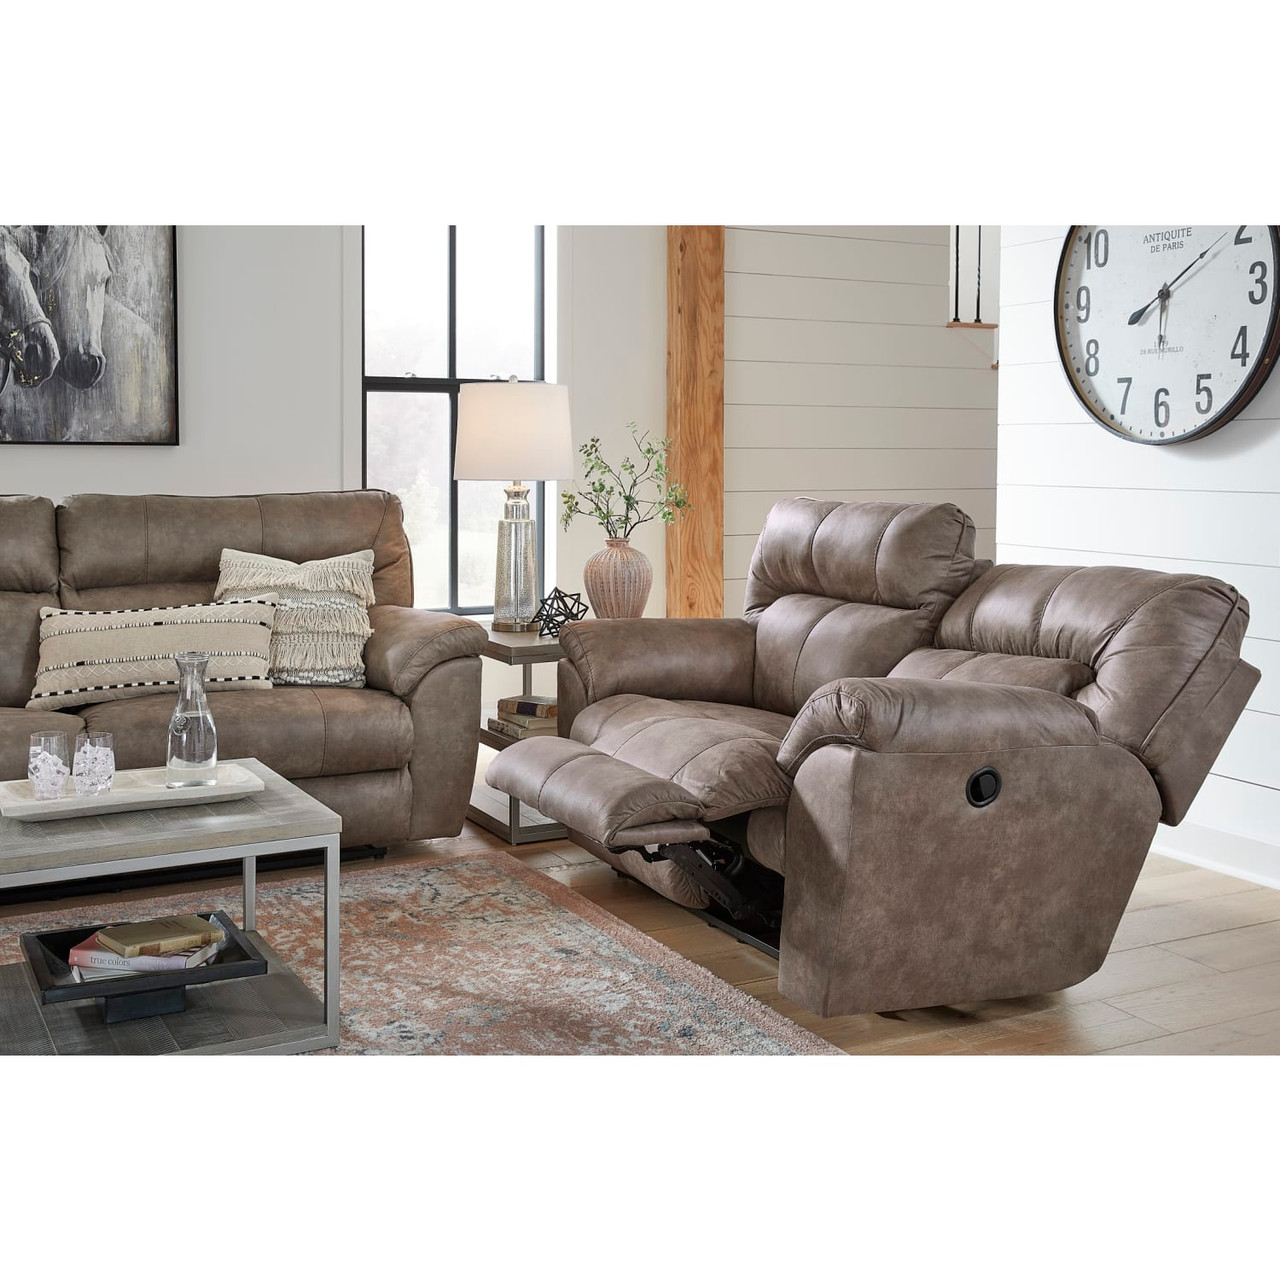 Harrison Coffee Faux Leather Recliner